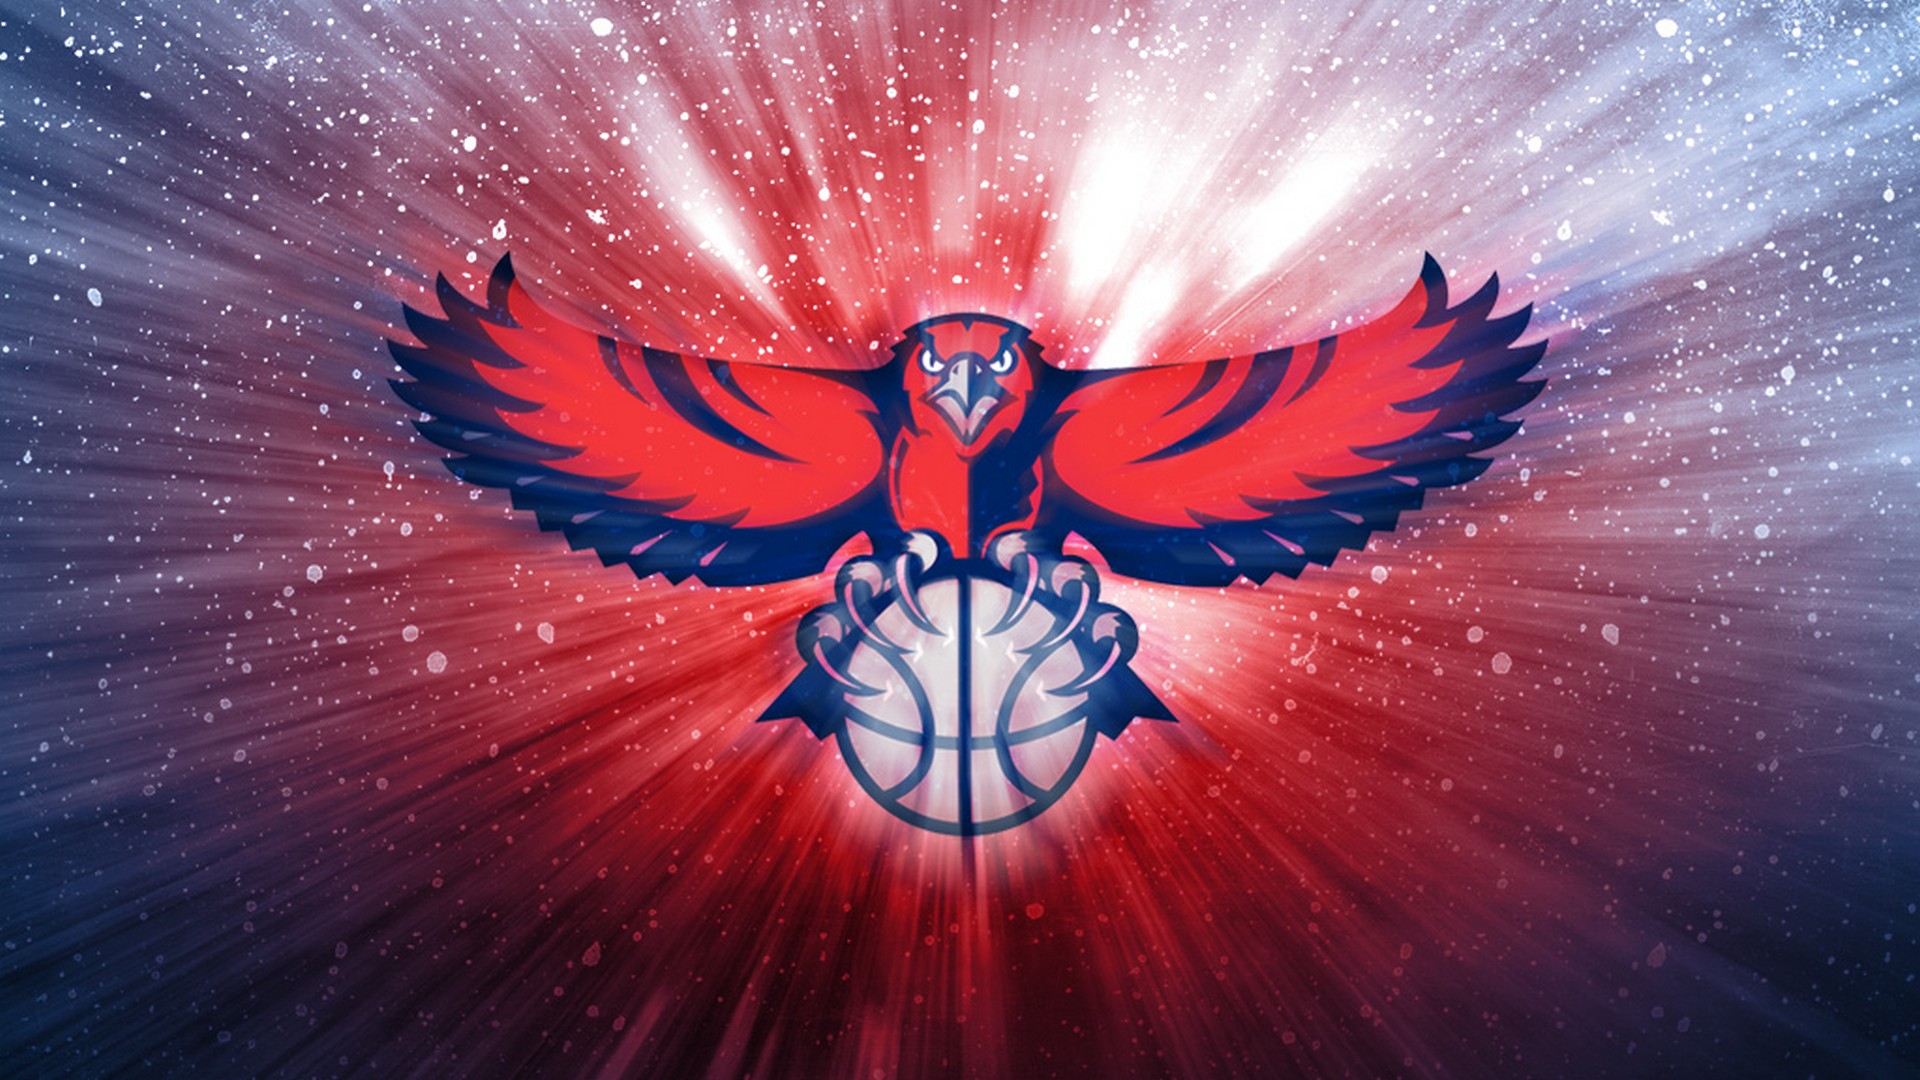 Atlanta Hawks For Mac Wallpaper with image dimensions 1920x1080 pixel. You can make this wallpaper for your Desktop Computer Backgrounds, Windows or Mac Screensavers, iPhone Lock screen, Tablet or Android and another Mobile Phone device